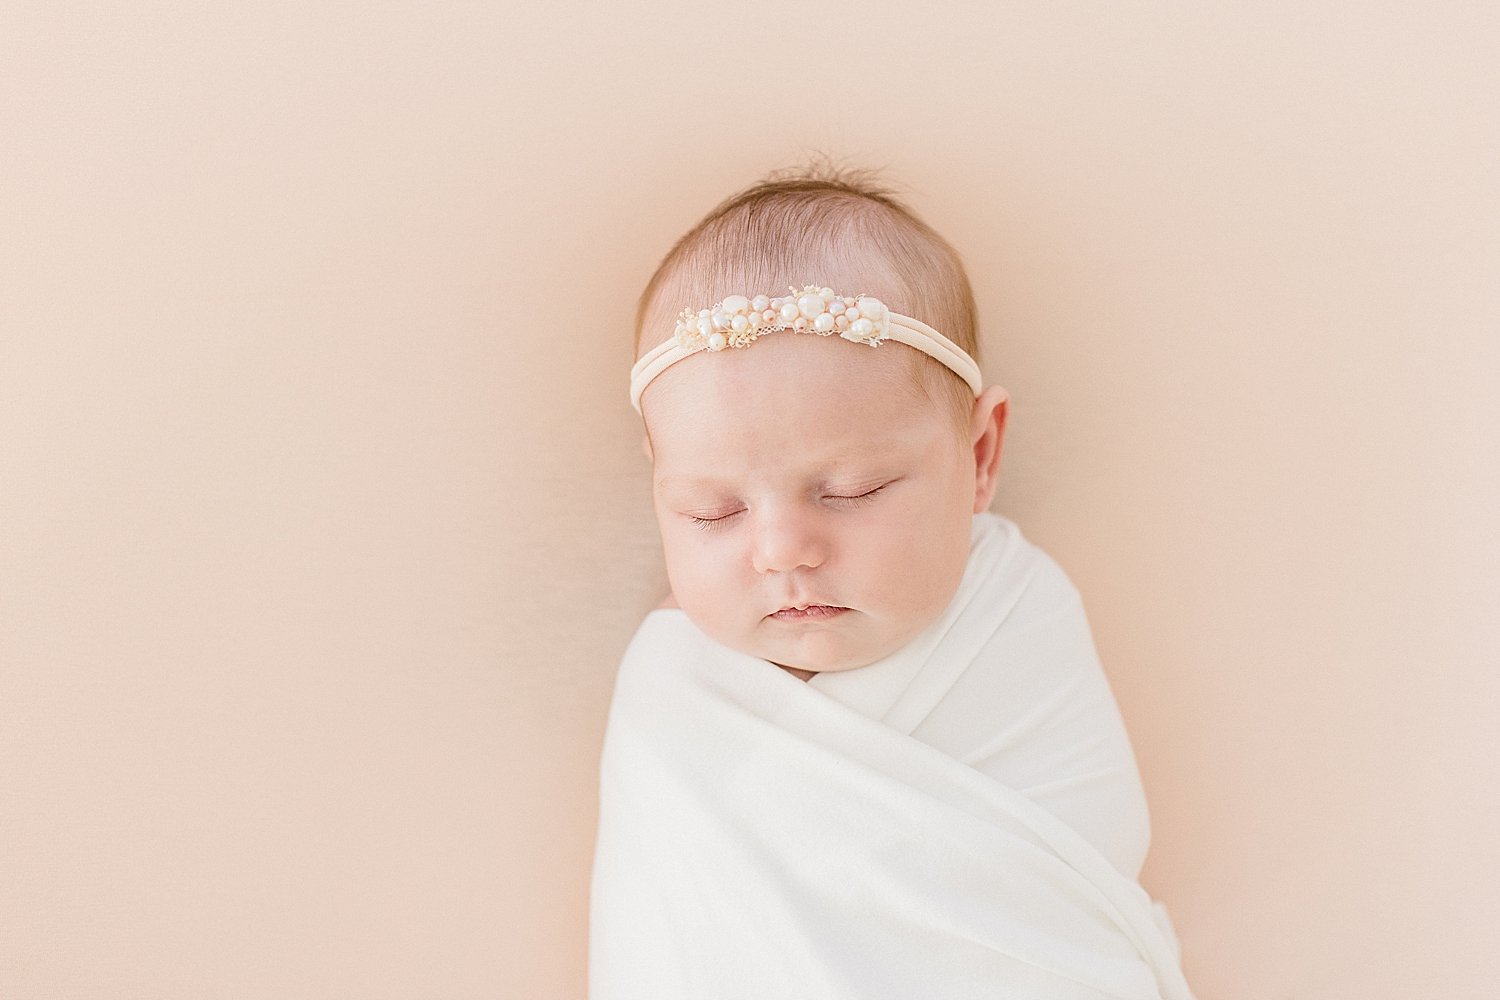 Baby girl swaddled and sleeping for newborn session | Ambre Williams Photography